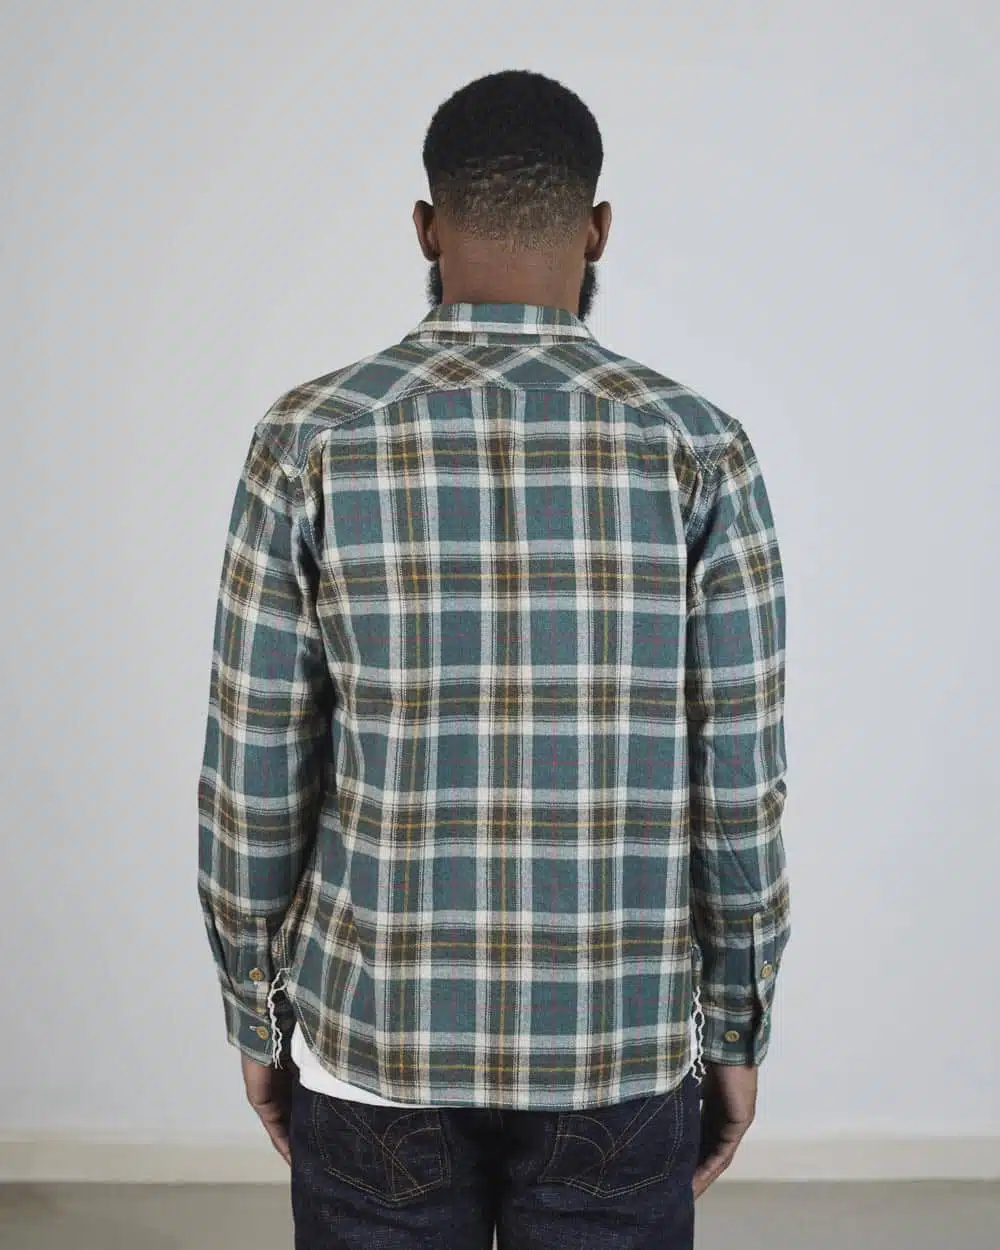 The Strike Gold SG2205 Brushed Check Work Shirt - Green